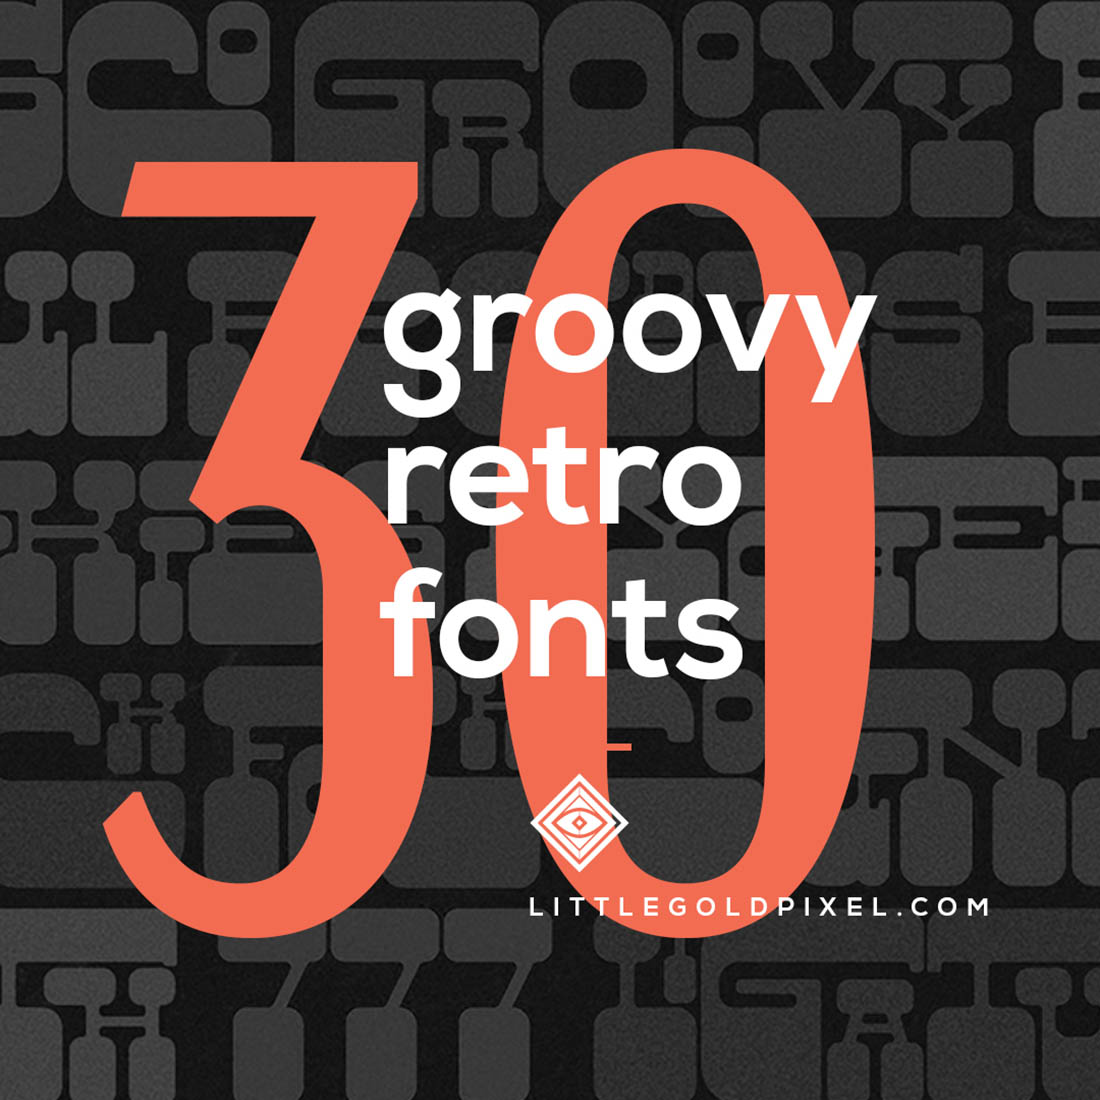 30 Groovy Fonts • Little Gold Pixel • #psychedelic #groovy #hippie #retro #typography #type #typeface #fonts #graphicdesign #1970s #1960s